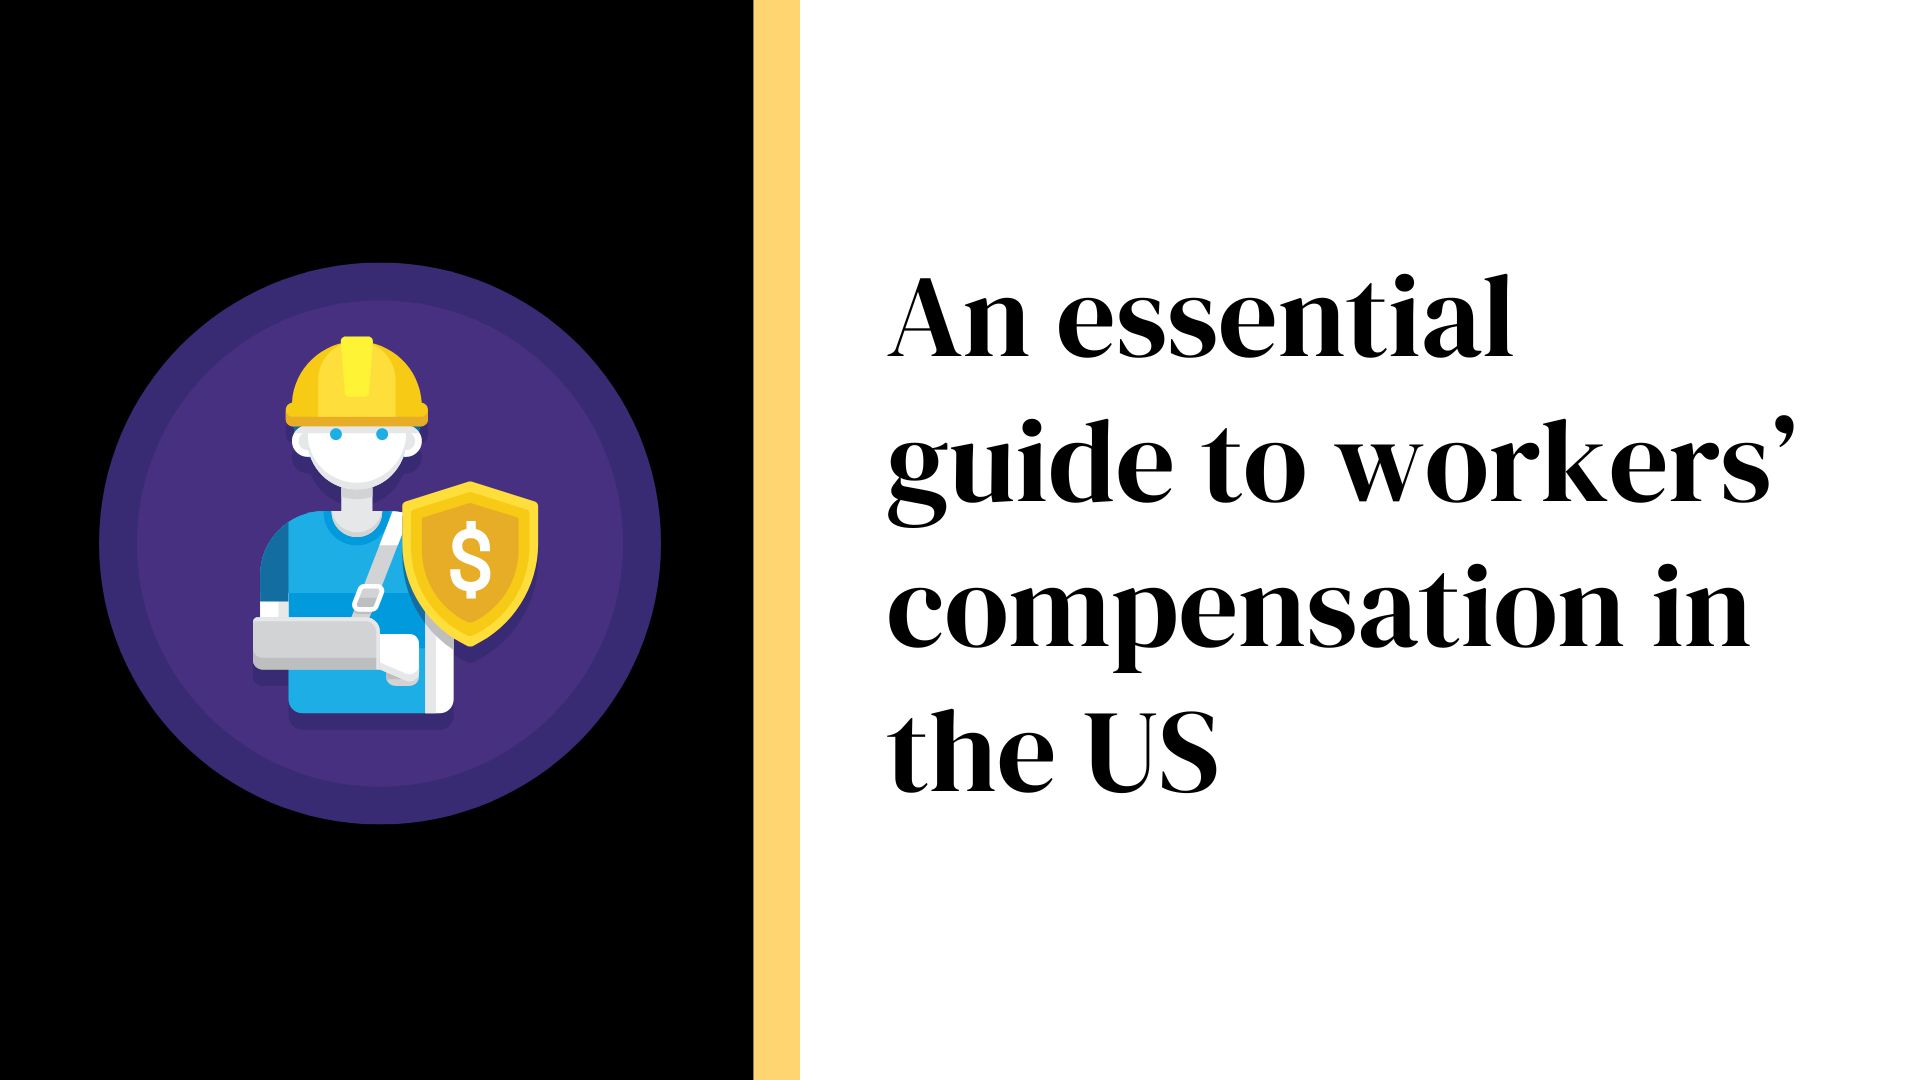 An essential guide to workers' compensation